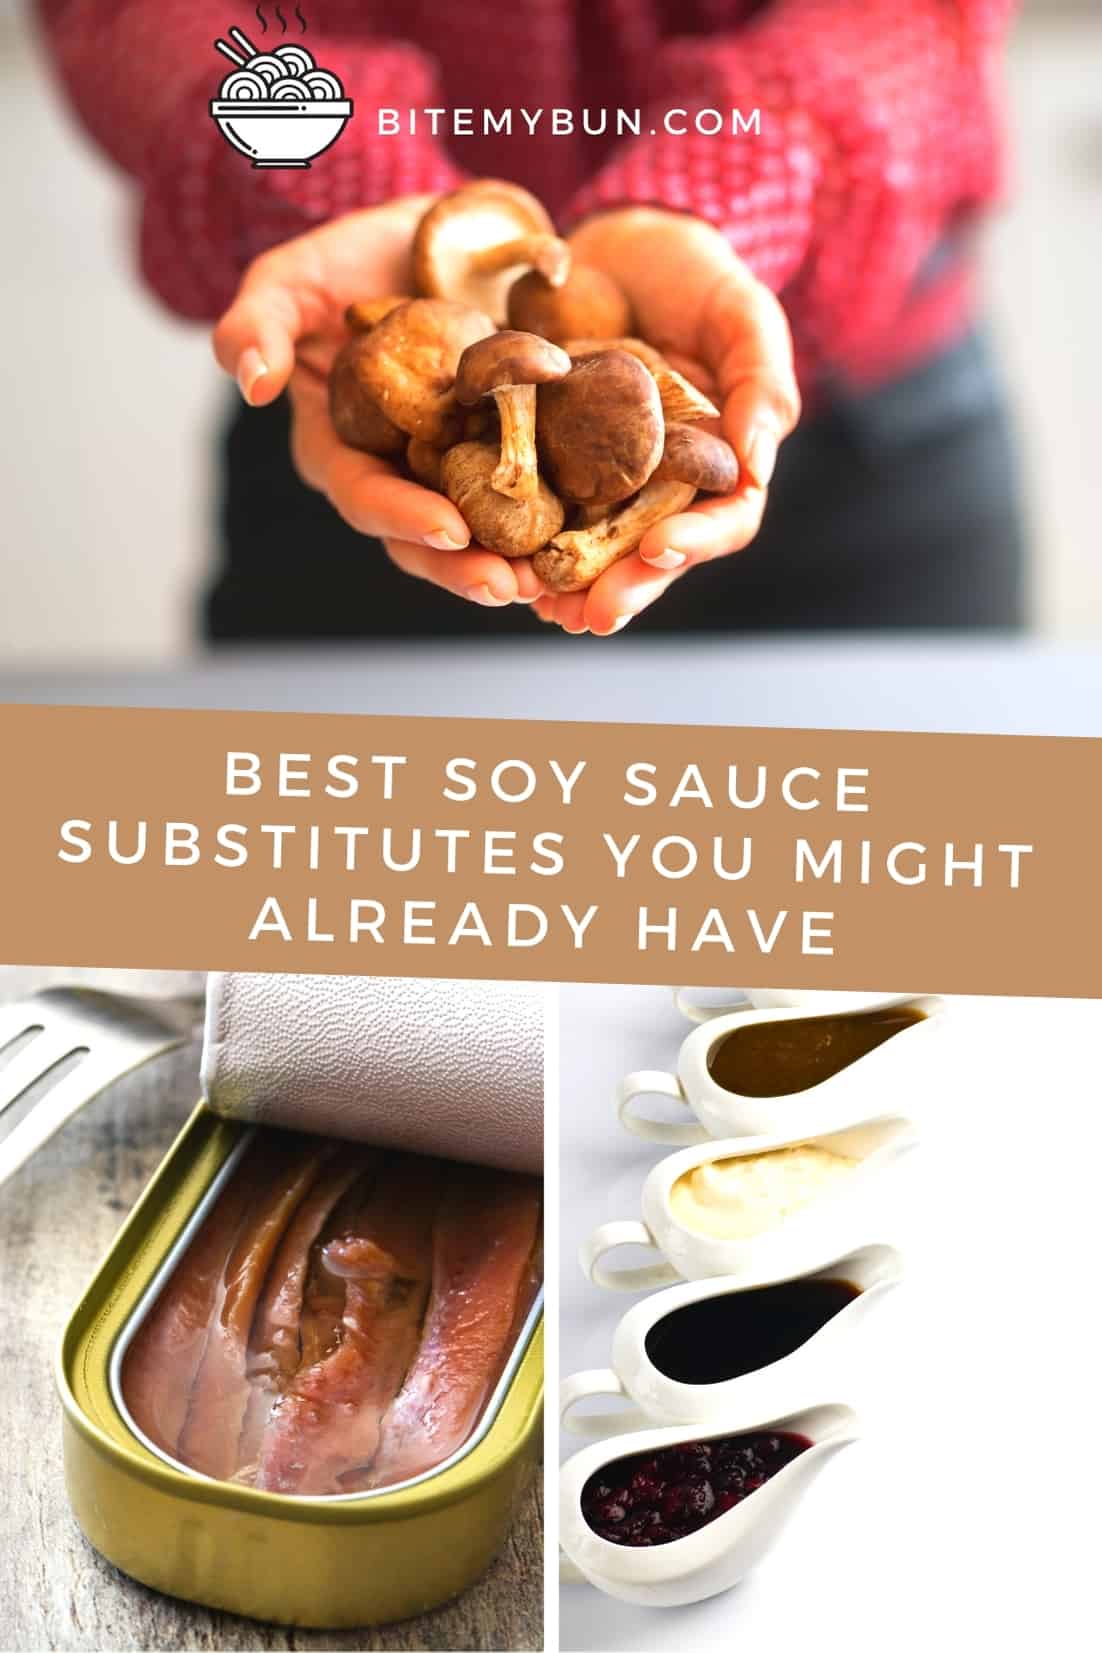 Best soy sauce substitutes you might already have